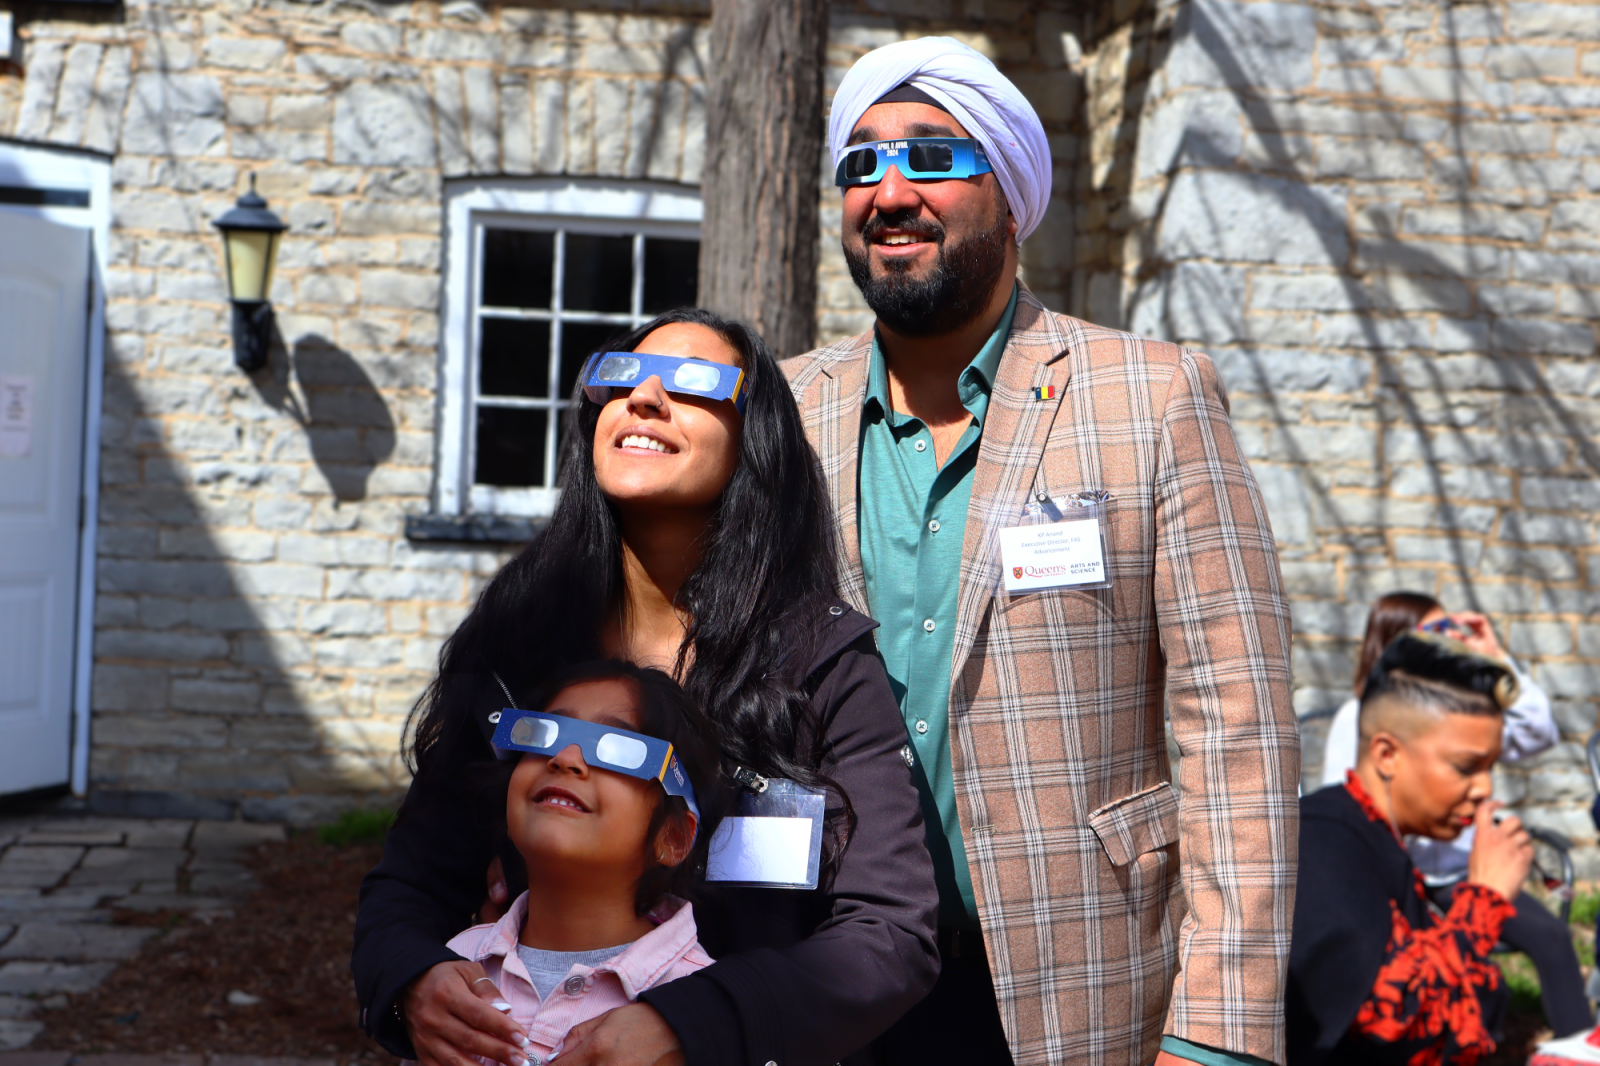 ED of FAS Advancement, KP Anand and his family at the Eclipse event